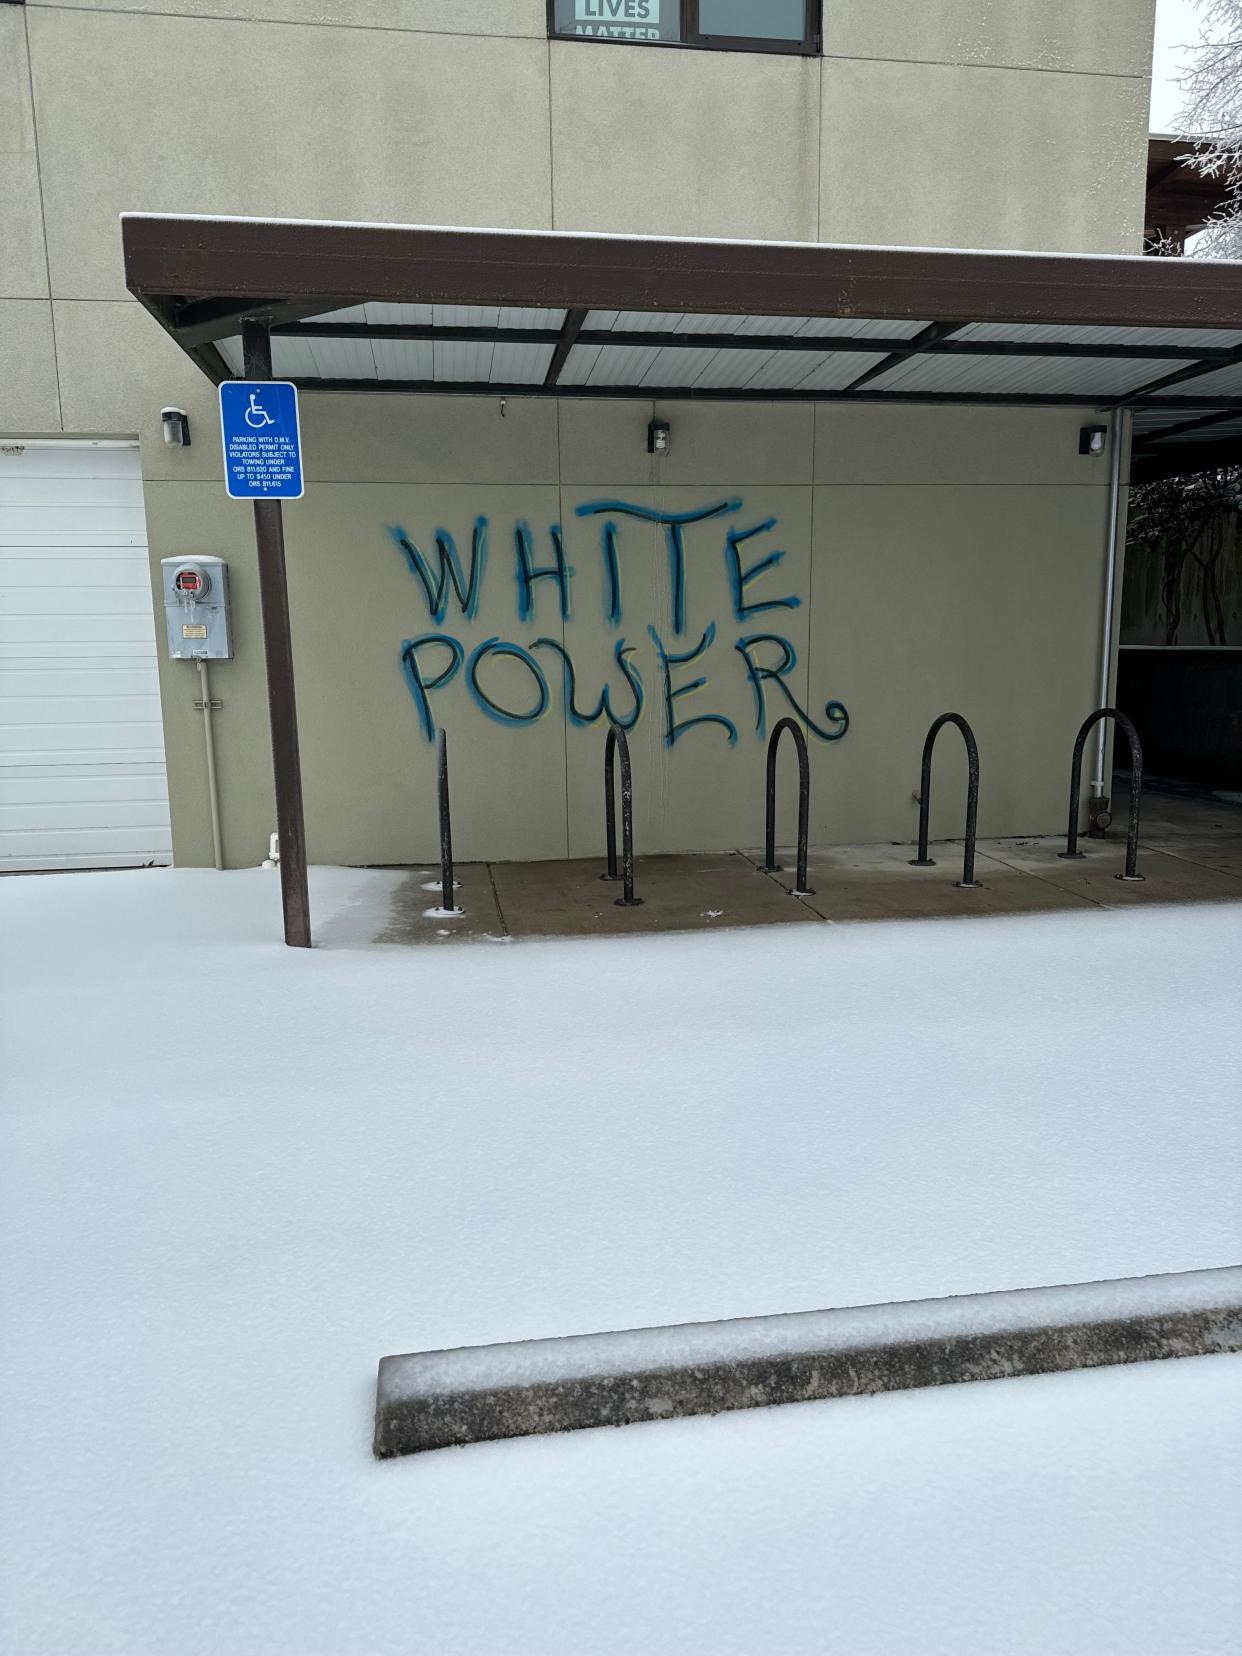 Graffiti tag at Temple Beth Israel depicts the term "White Power" on Jan. 14